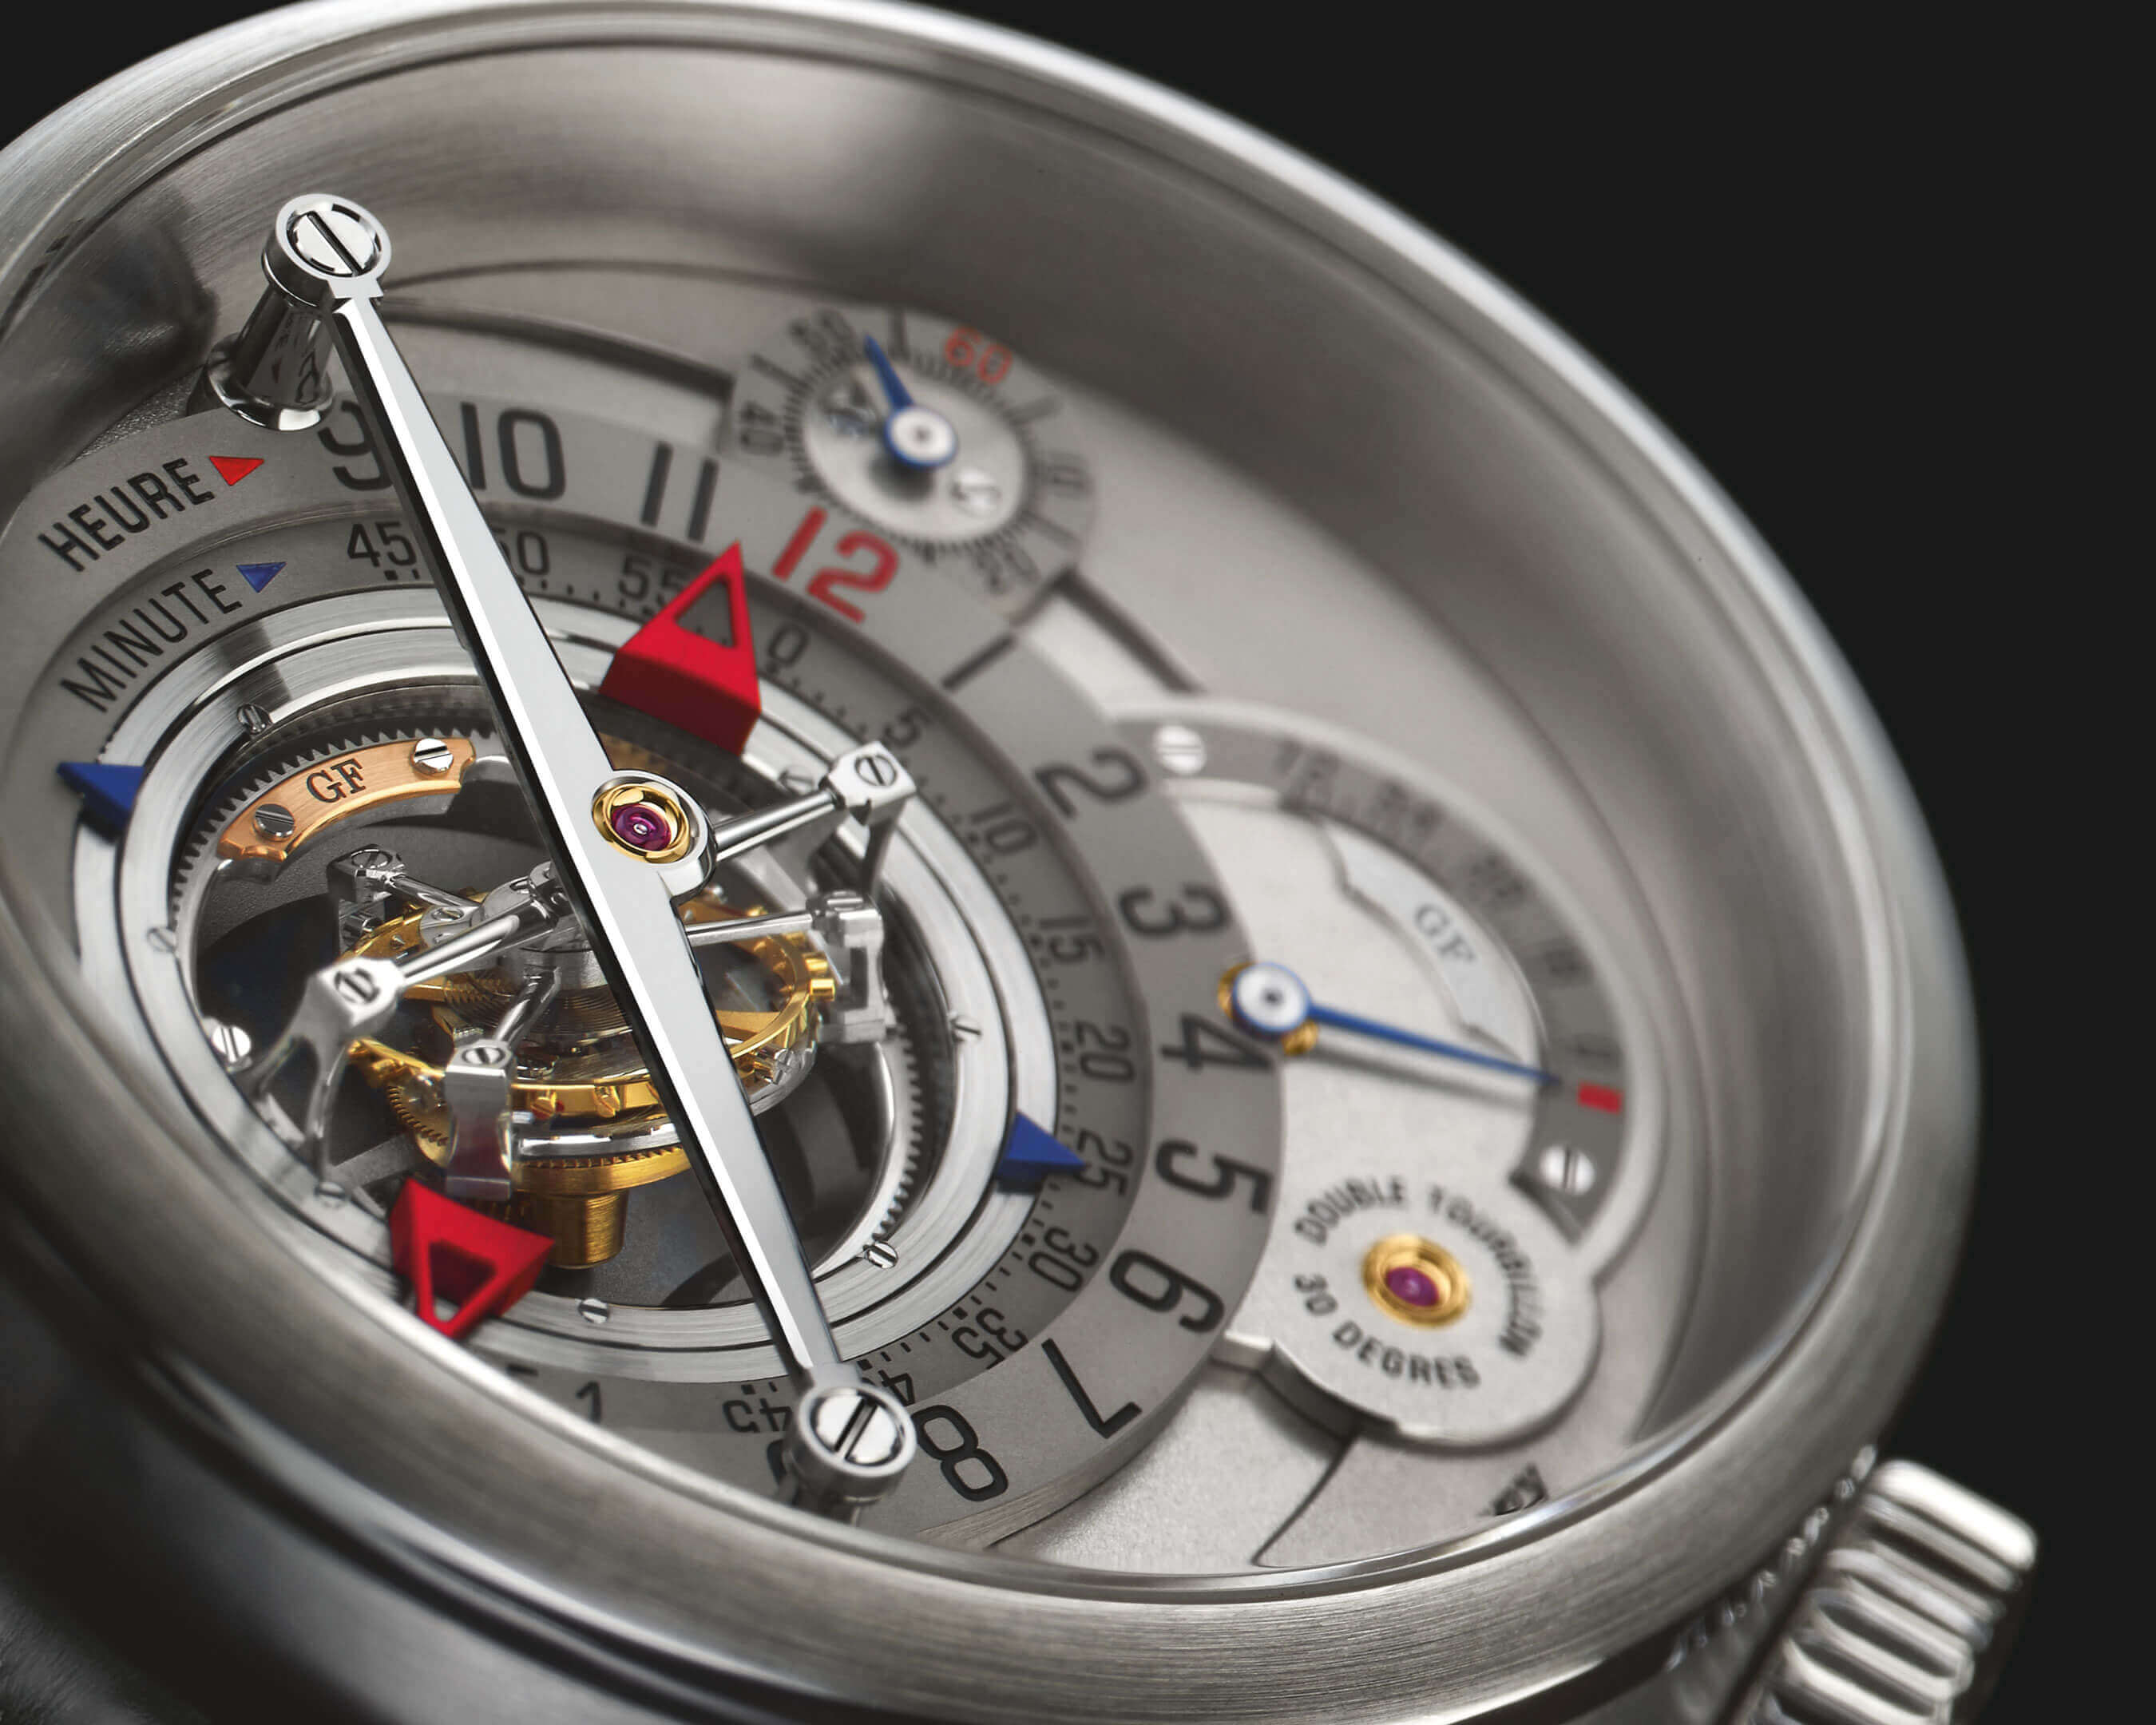 Invention Piece 1 - Greubel Forsey